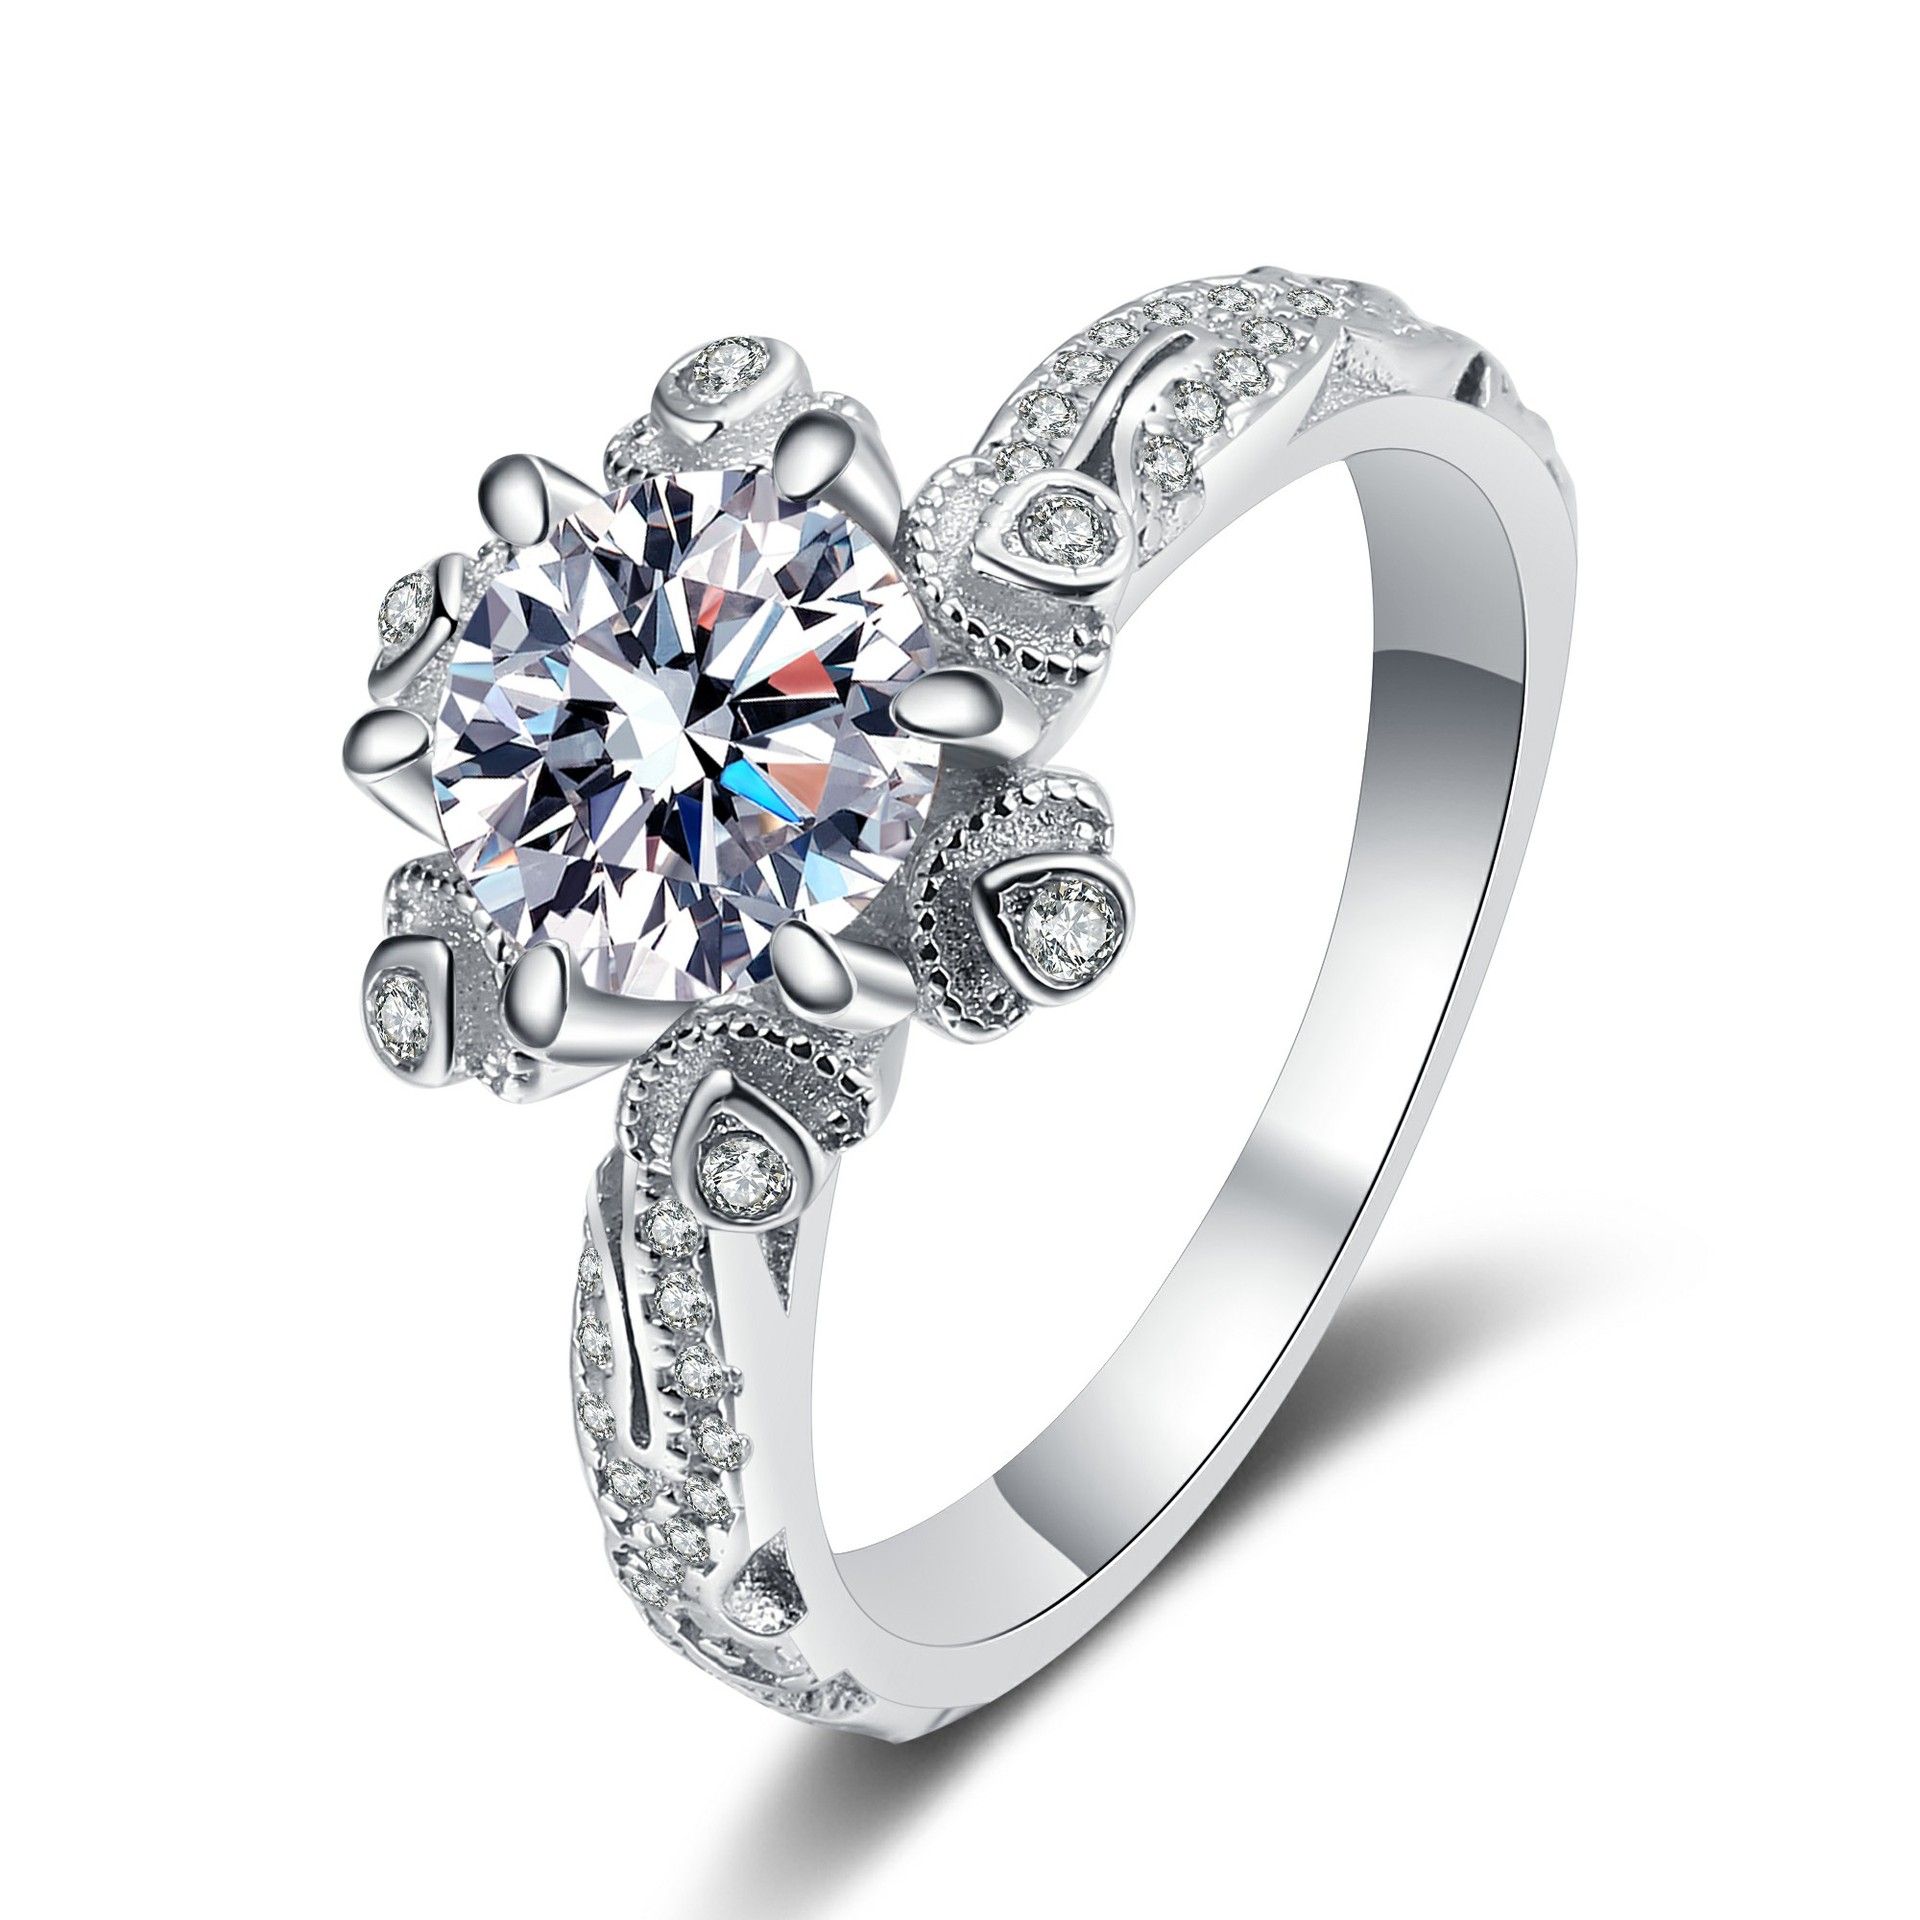 Couple's jewelry a special jewelry piece Engagement ring D-grade Moissanite with colorful hues D-grade Moissanite with VVS1 clarity